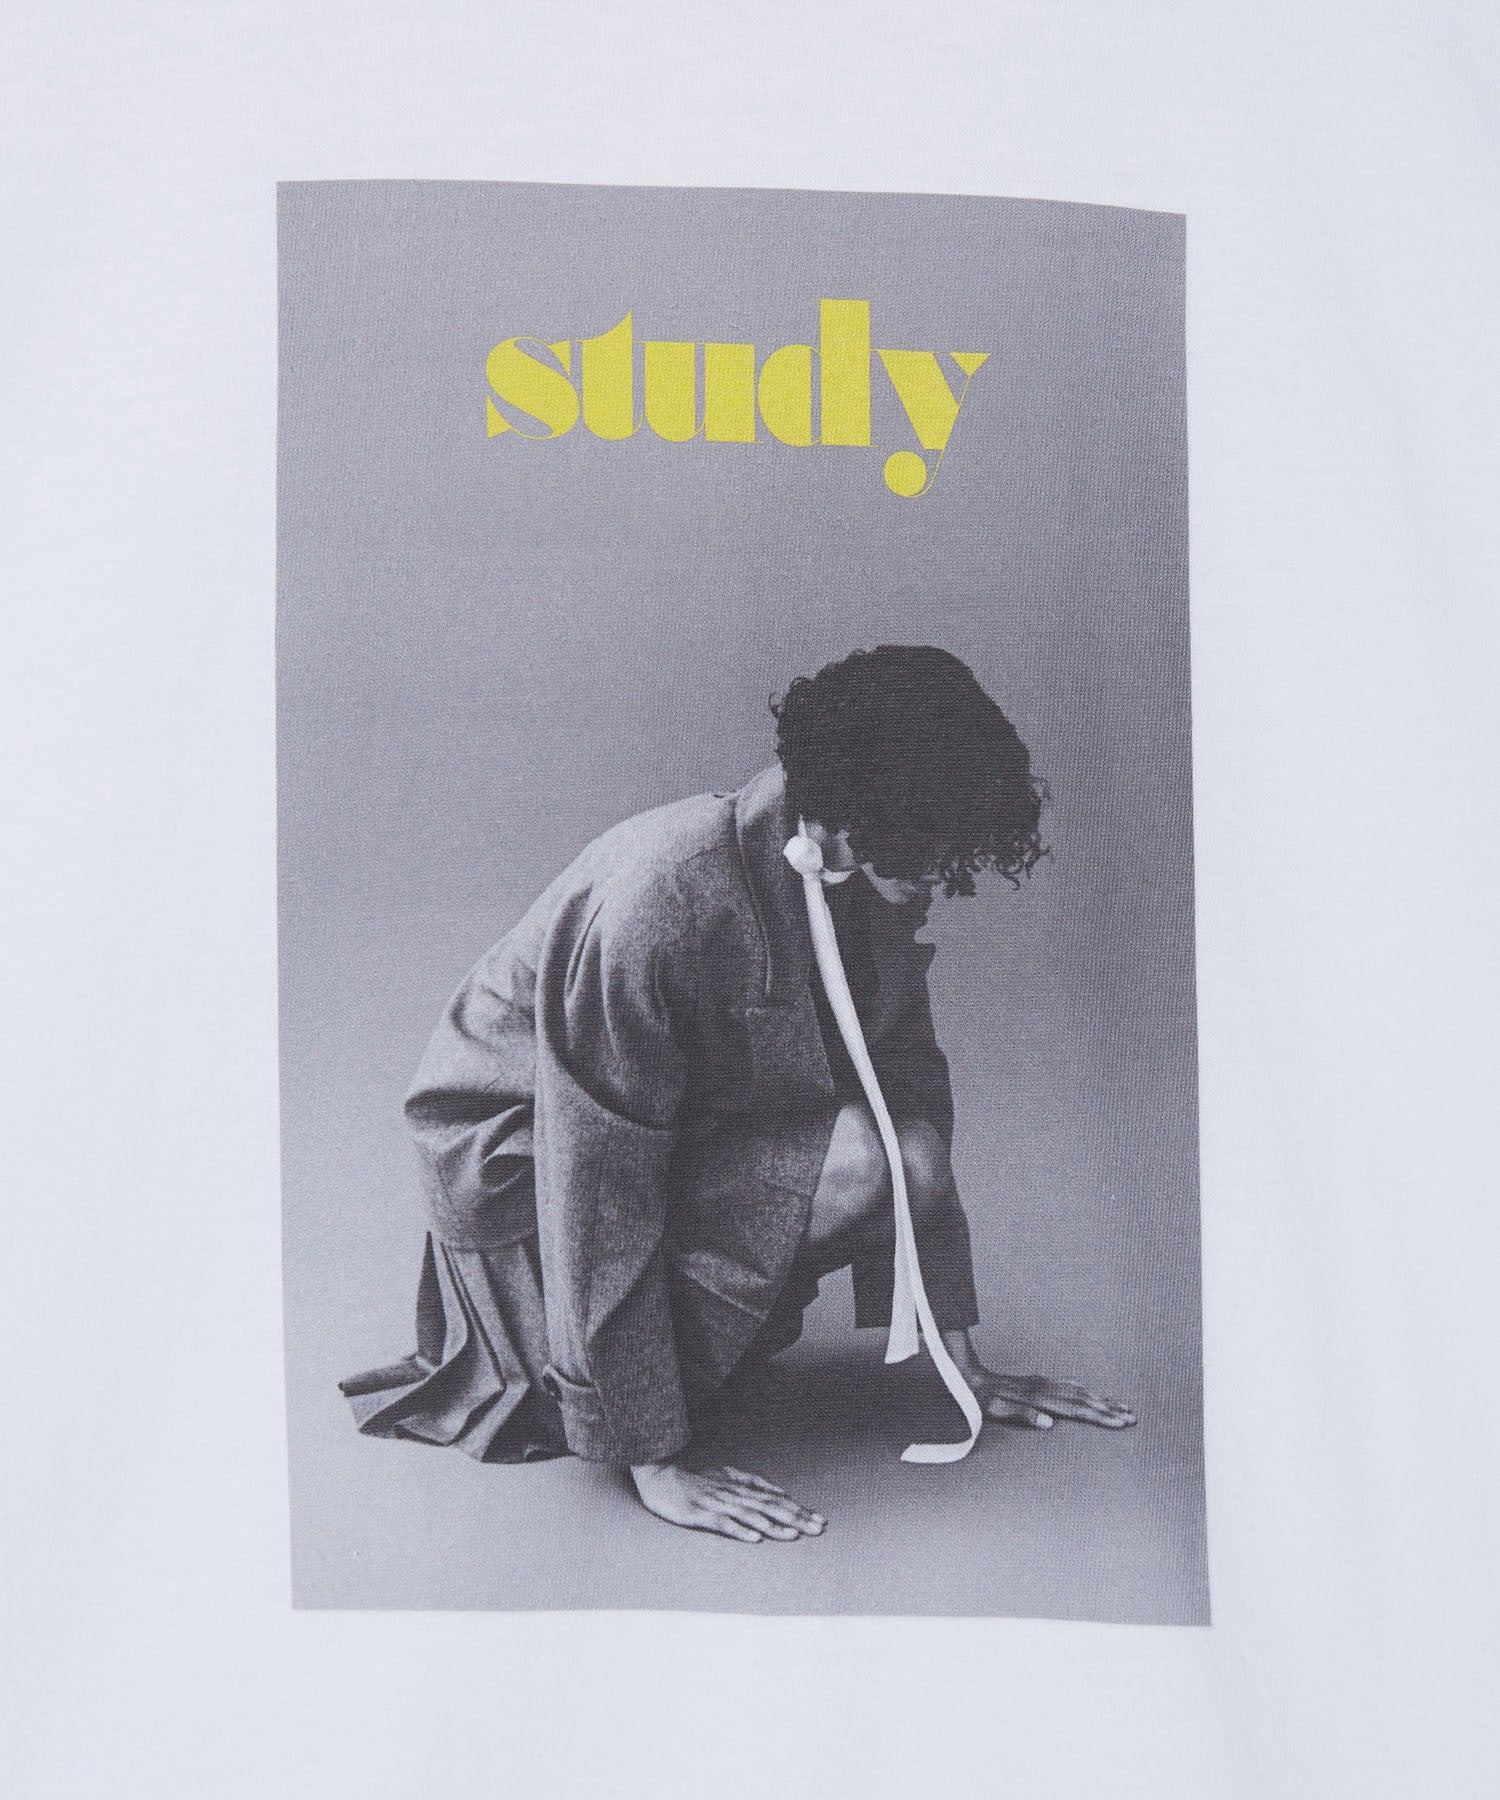 Study for BIOTOP】Photo T-shirts ｜ ADAM ET ROPE' | アダムエロペ 